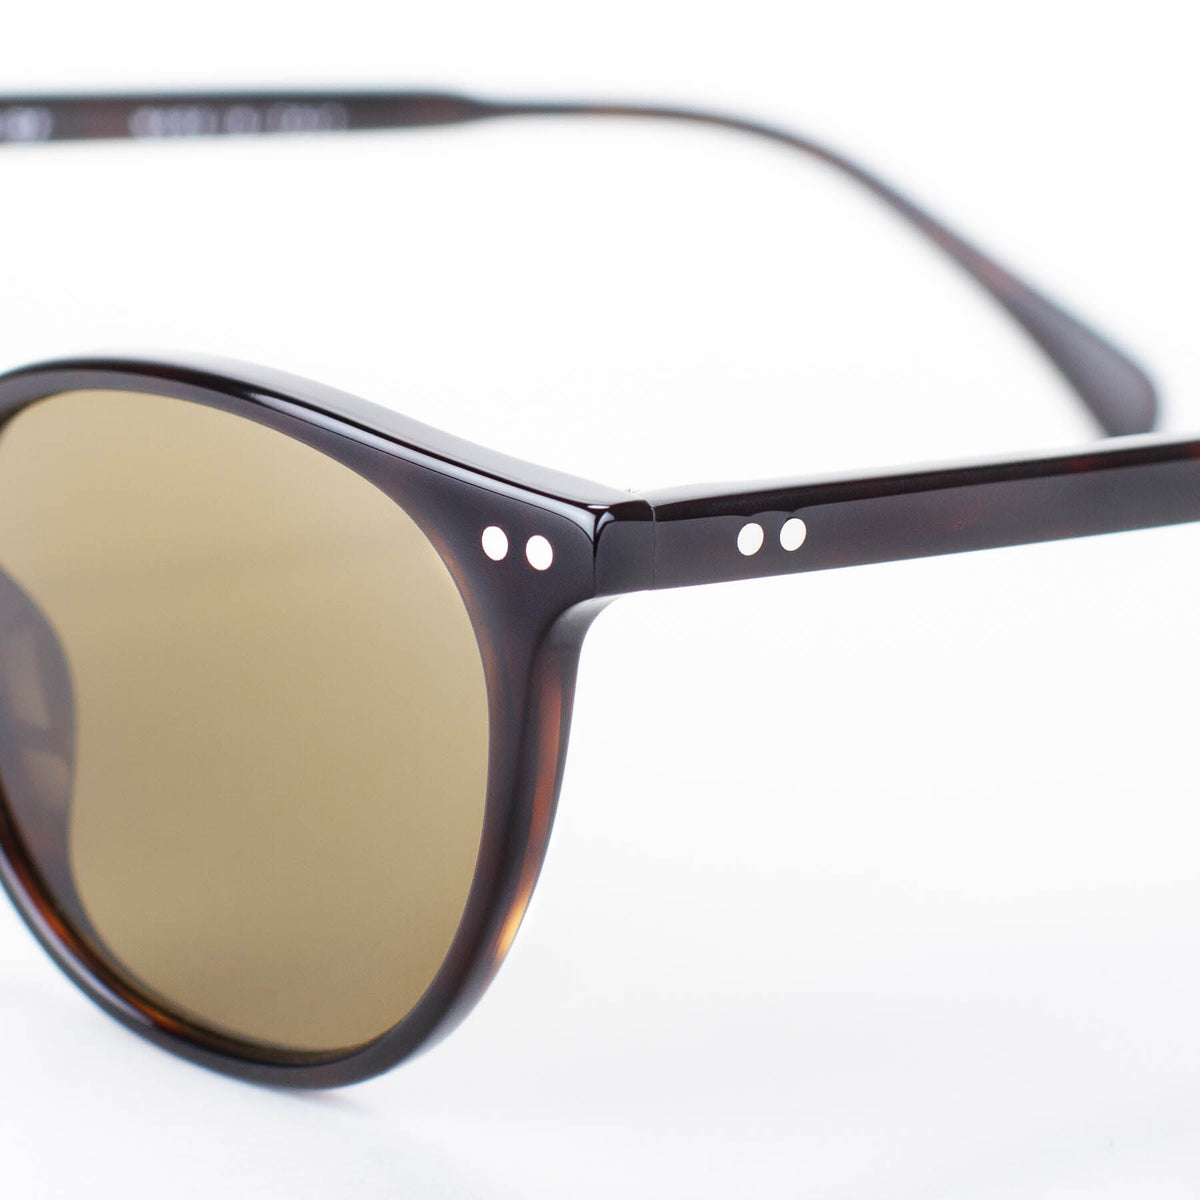 'Out of' Modena Fashion Sunglasses. Detail.